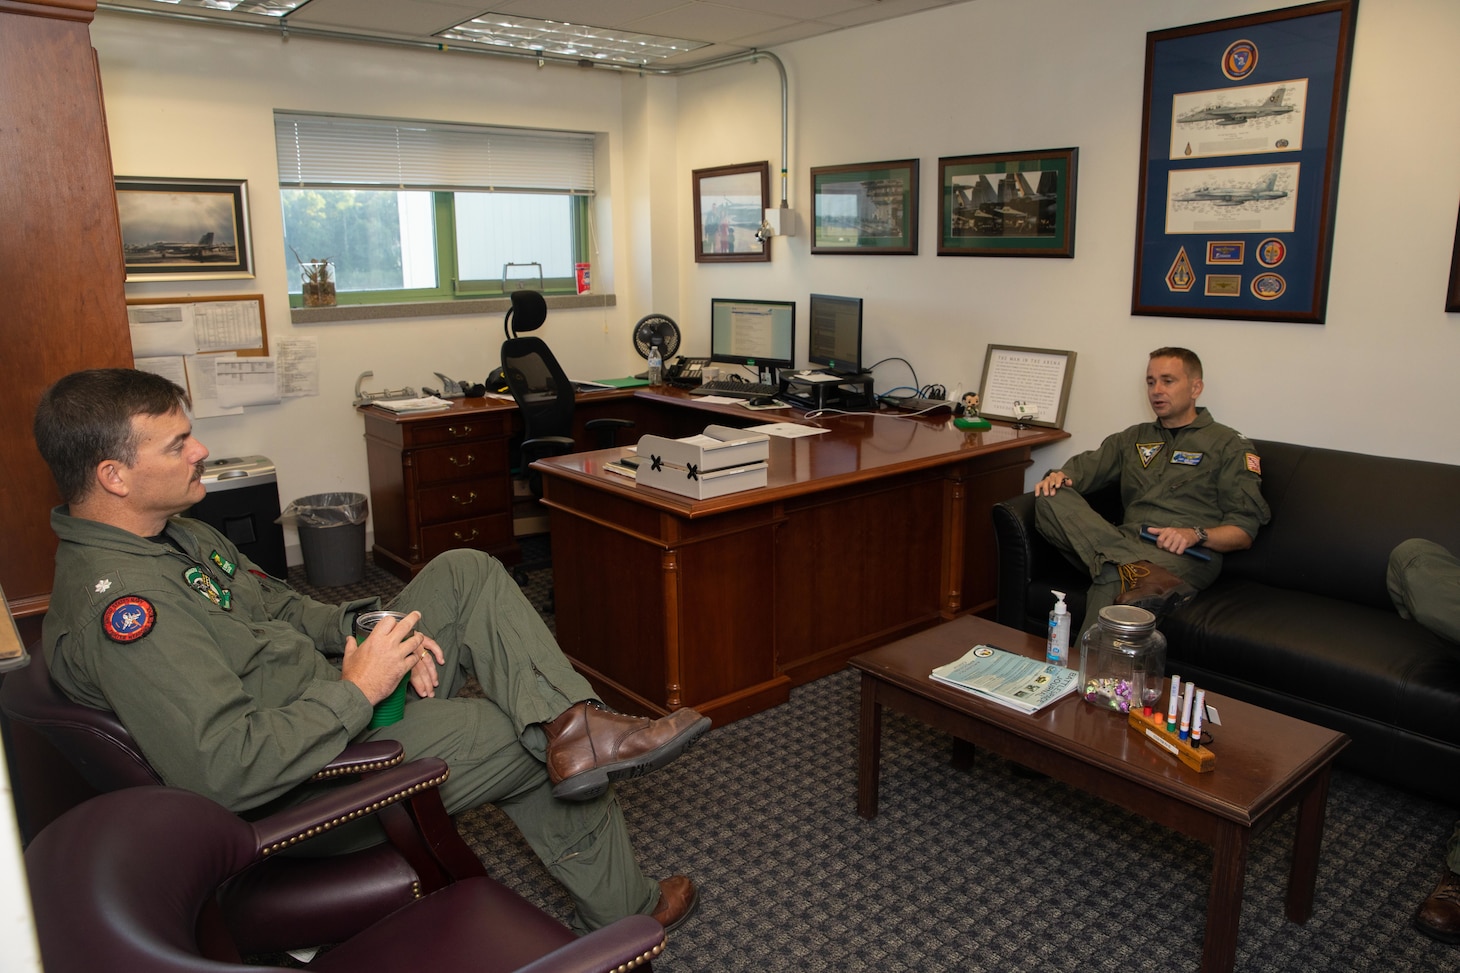 Two Naval Officers talking in an office